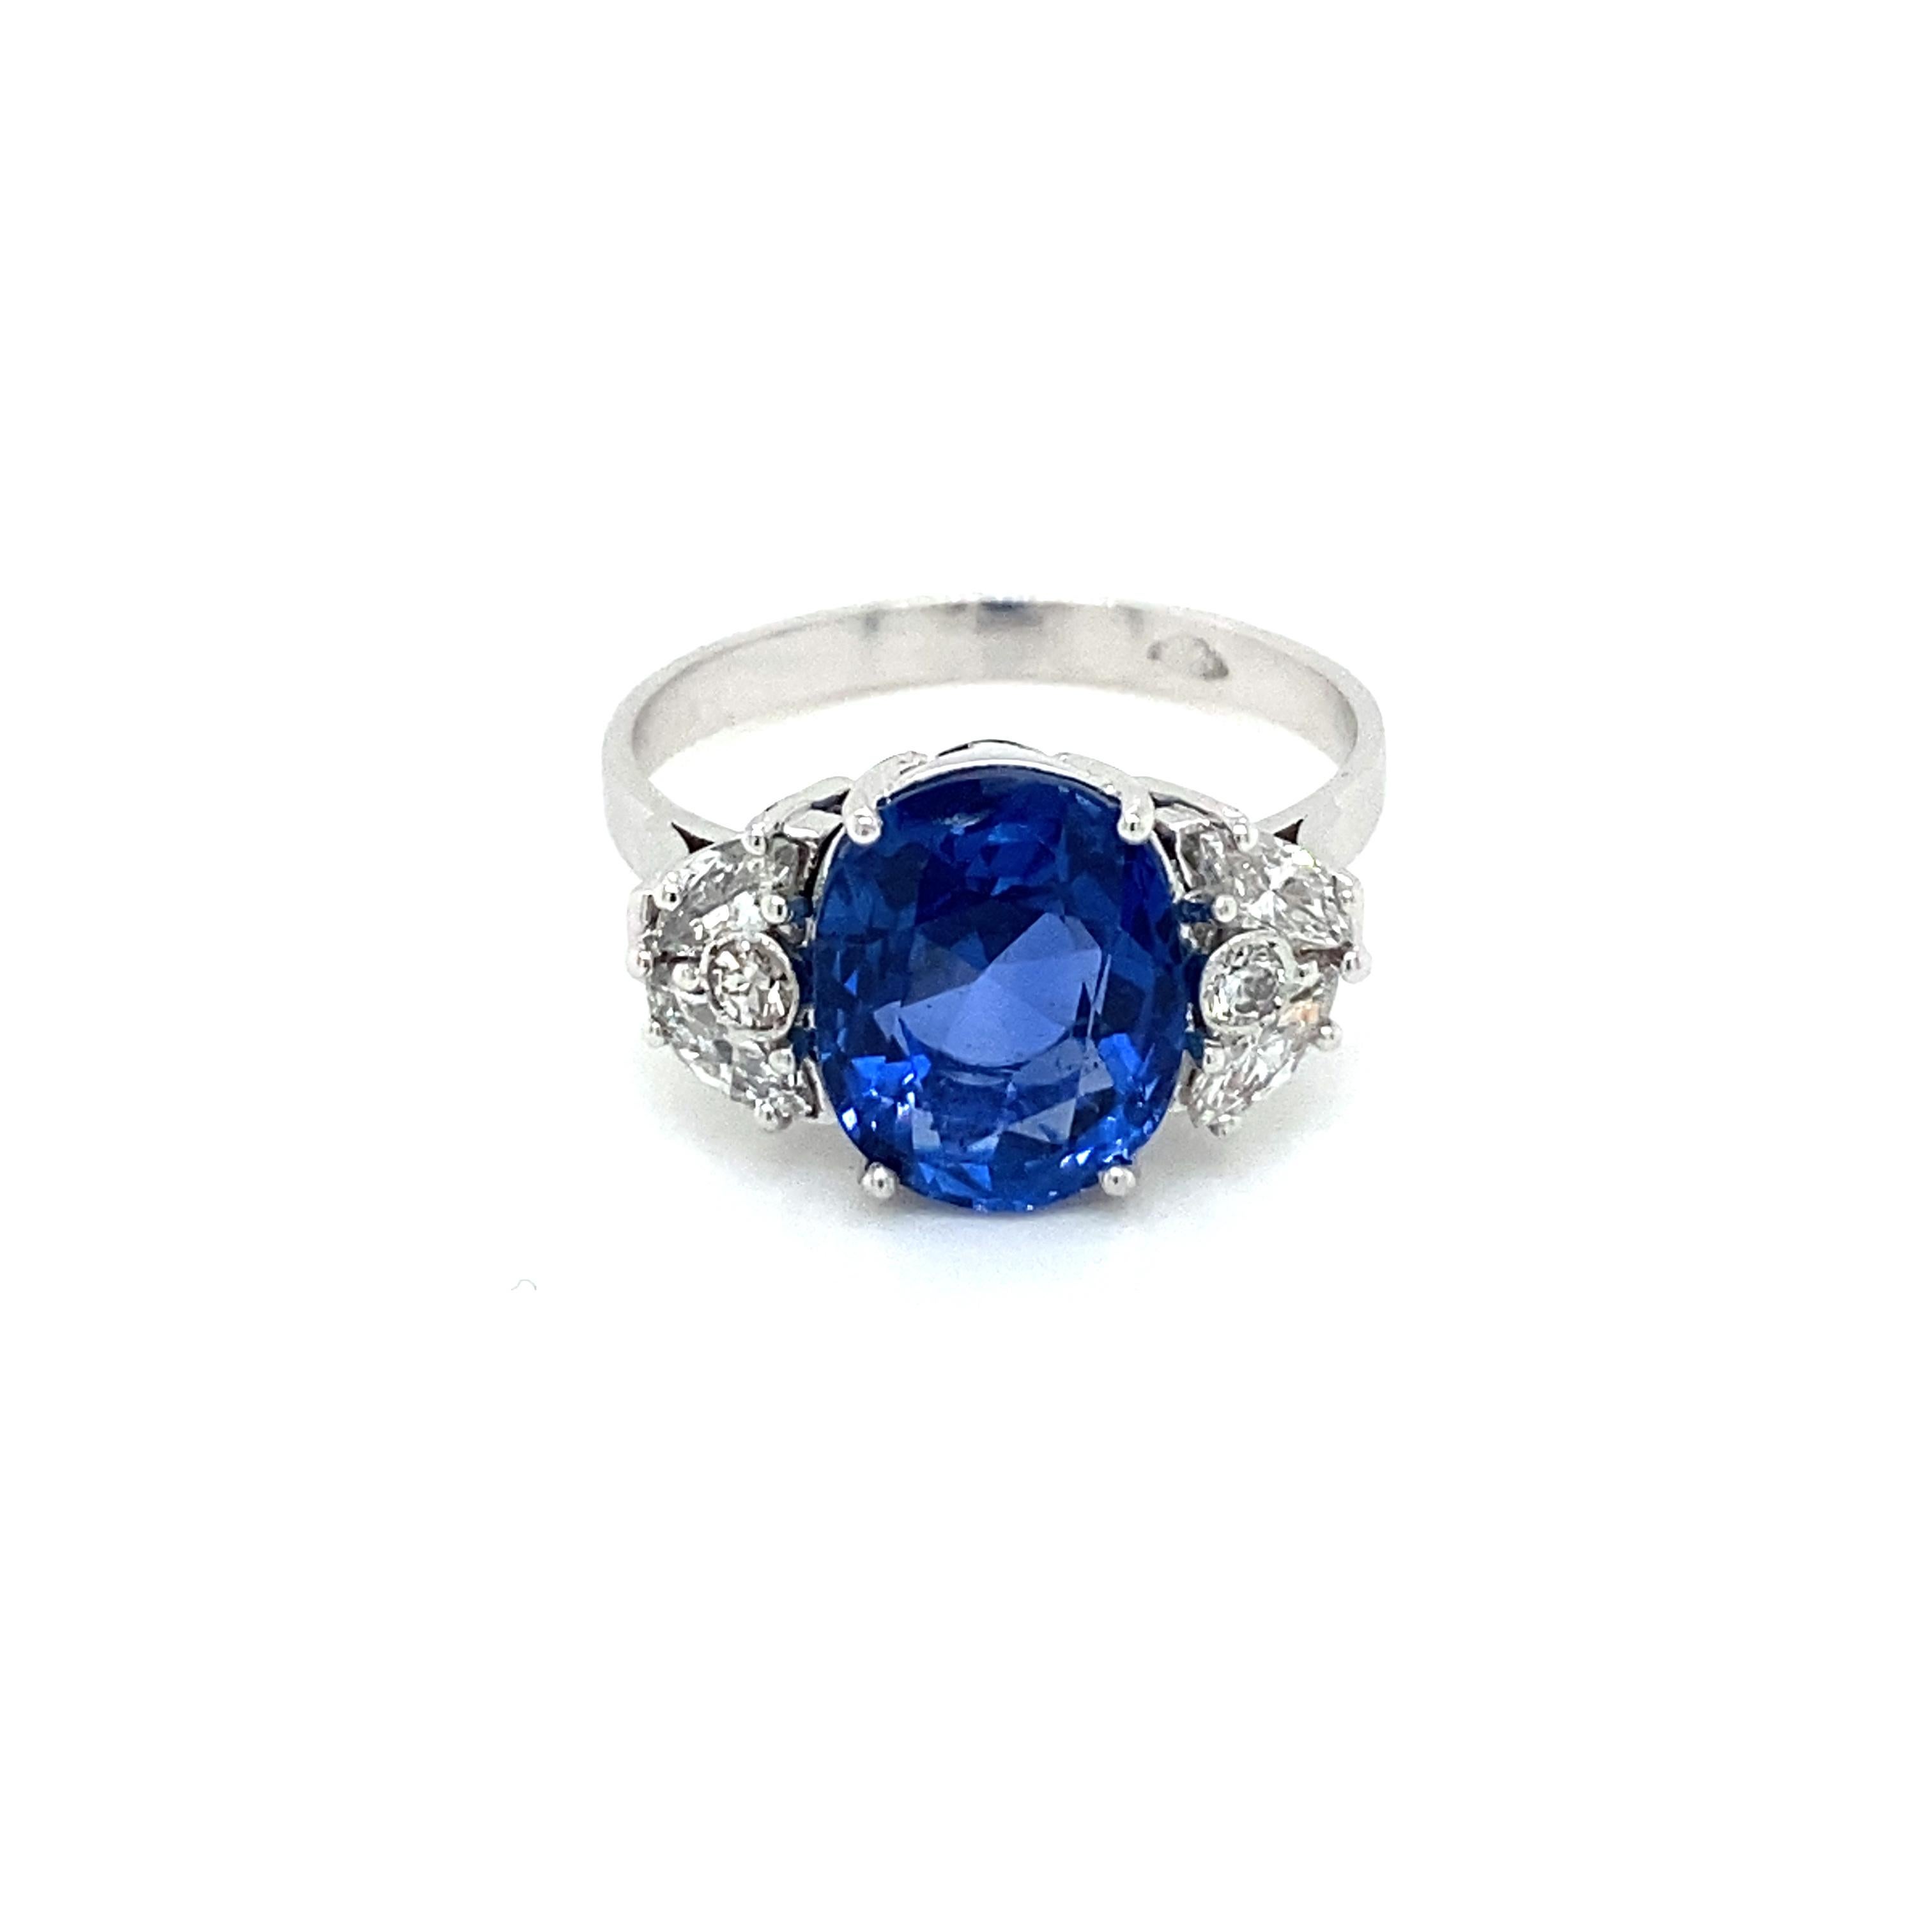 An exquisite ring handcrafted in Platinum, featuring an amazing rare vivid 4,40 carat Unheated untreated Natural Ceylon Sapphire oval-shape, surrounded by 0,50 carats of round brilliant and marquise cut diamonds.

The Sapphire is accompanied by a